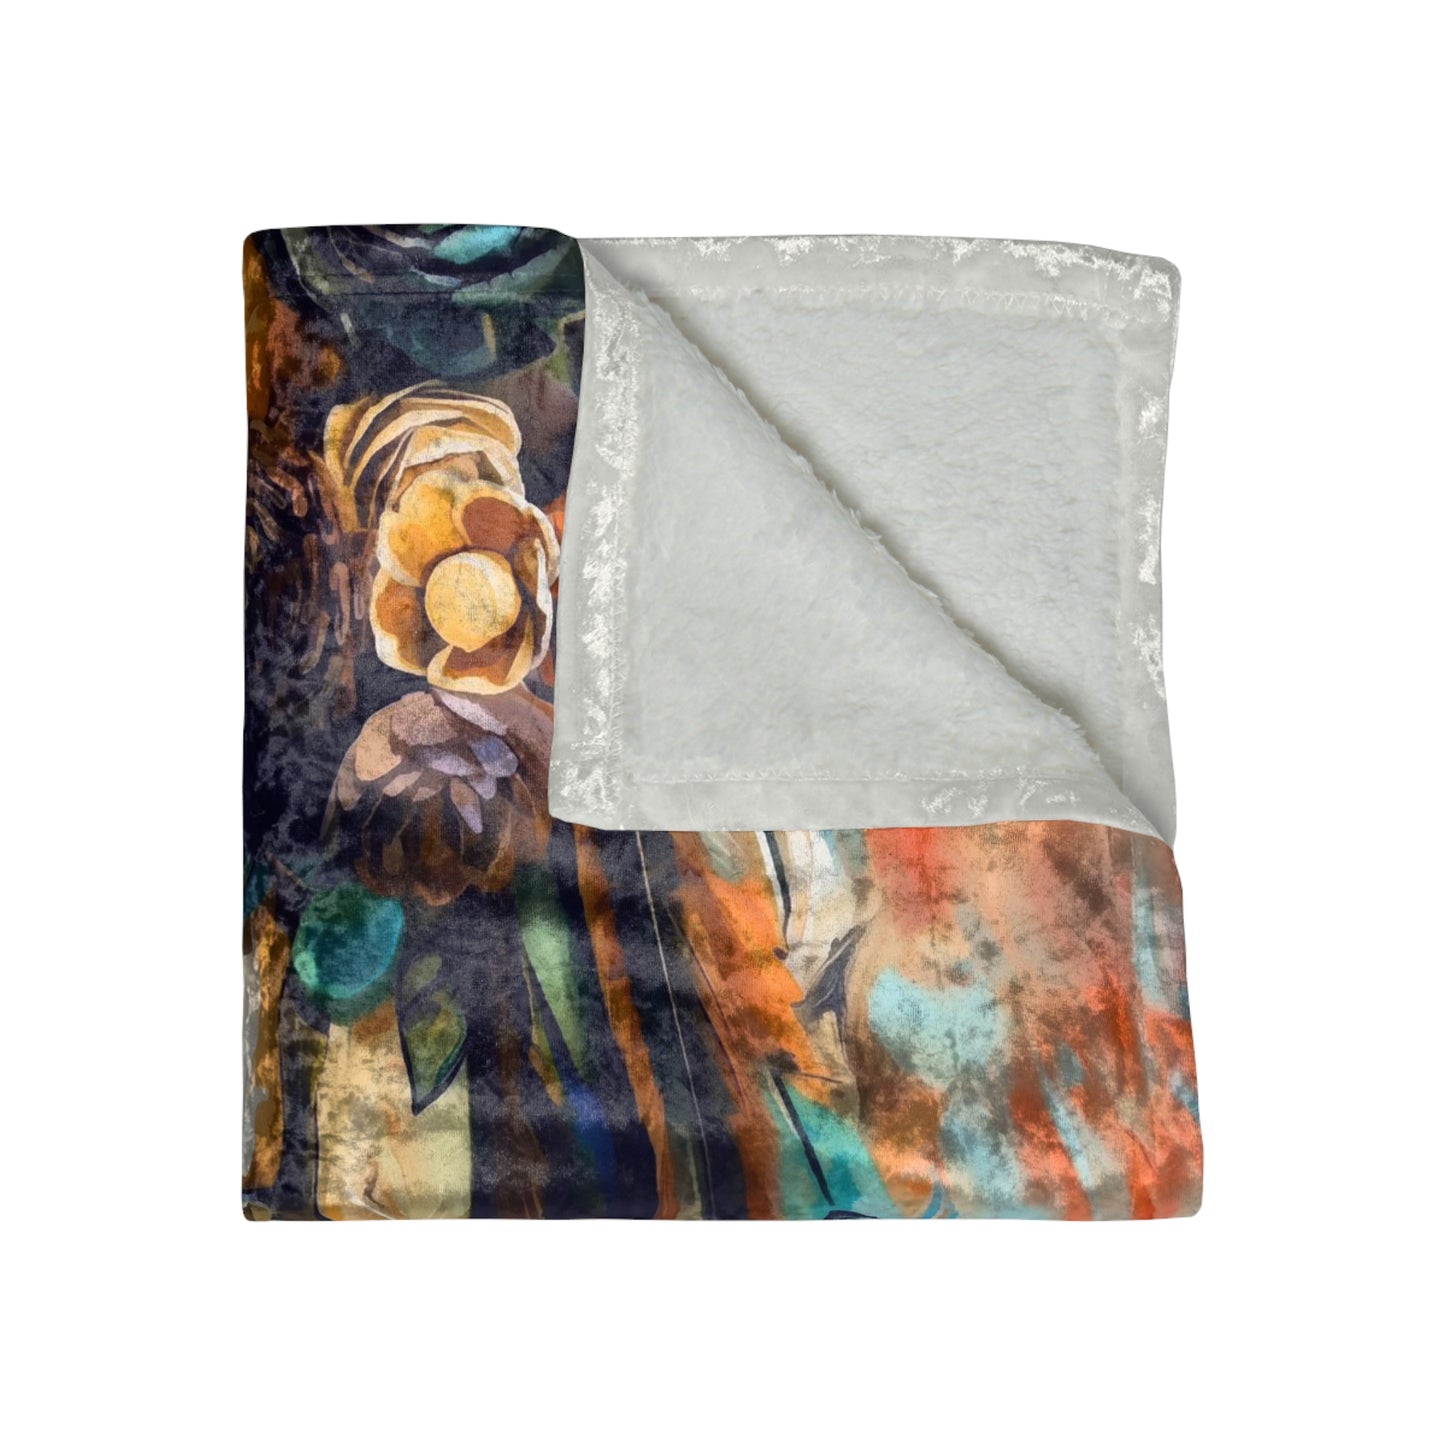 SouthWestern Indian Horse Design on a Velvet Throw for Bed or Couch